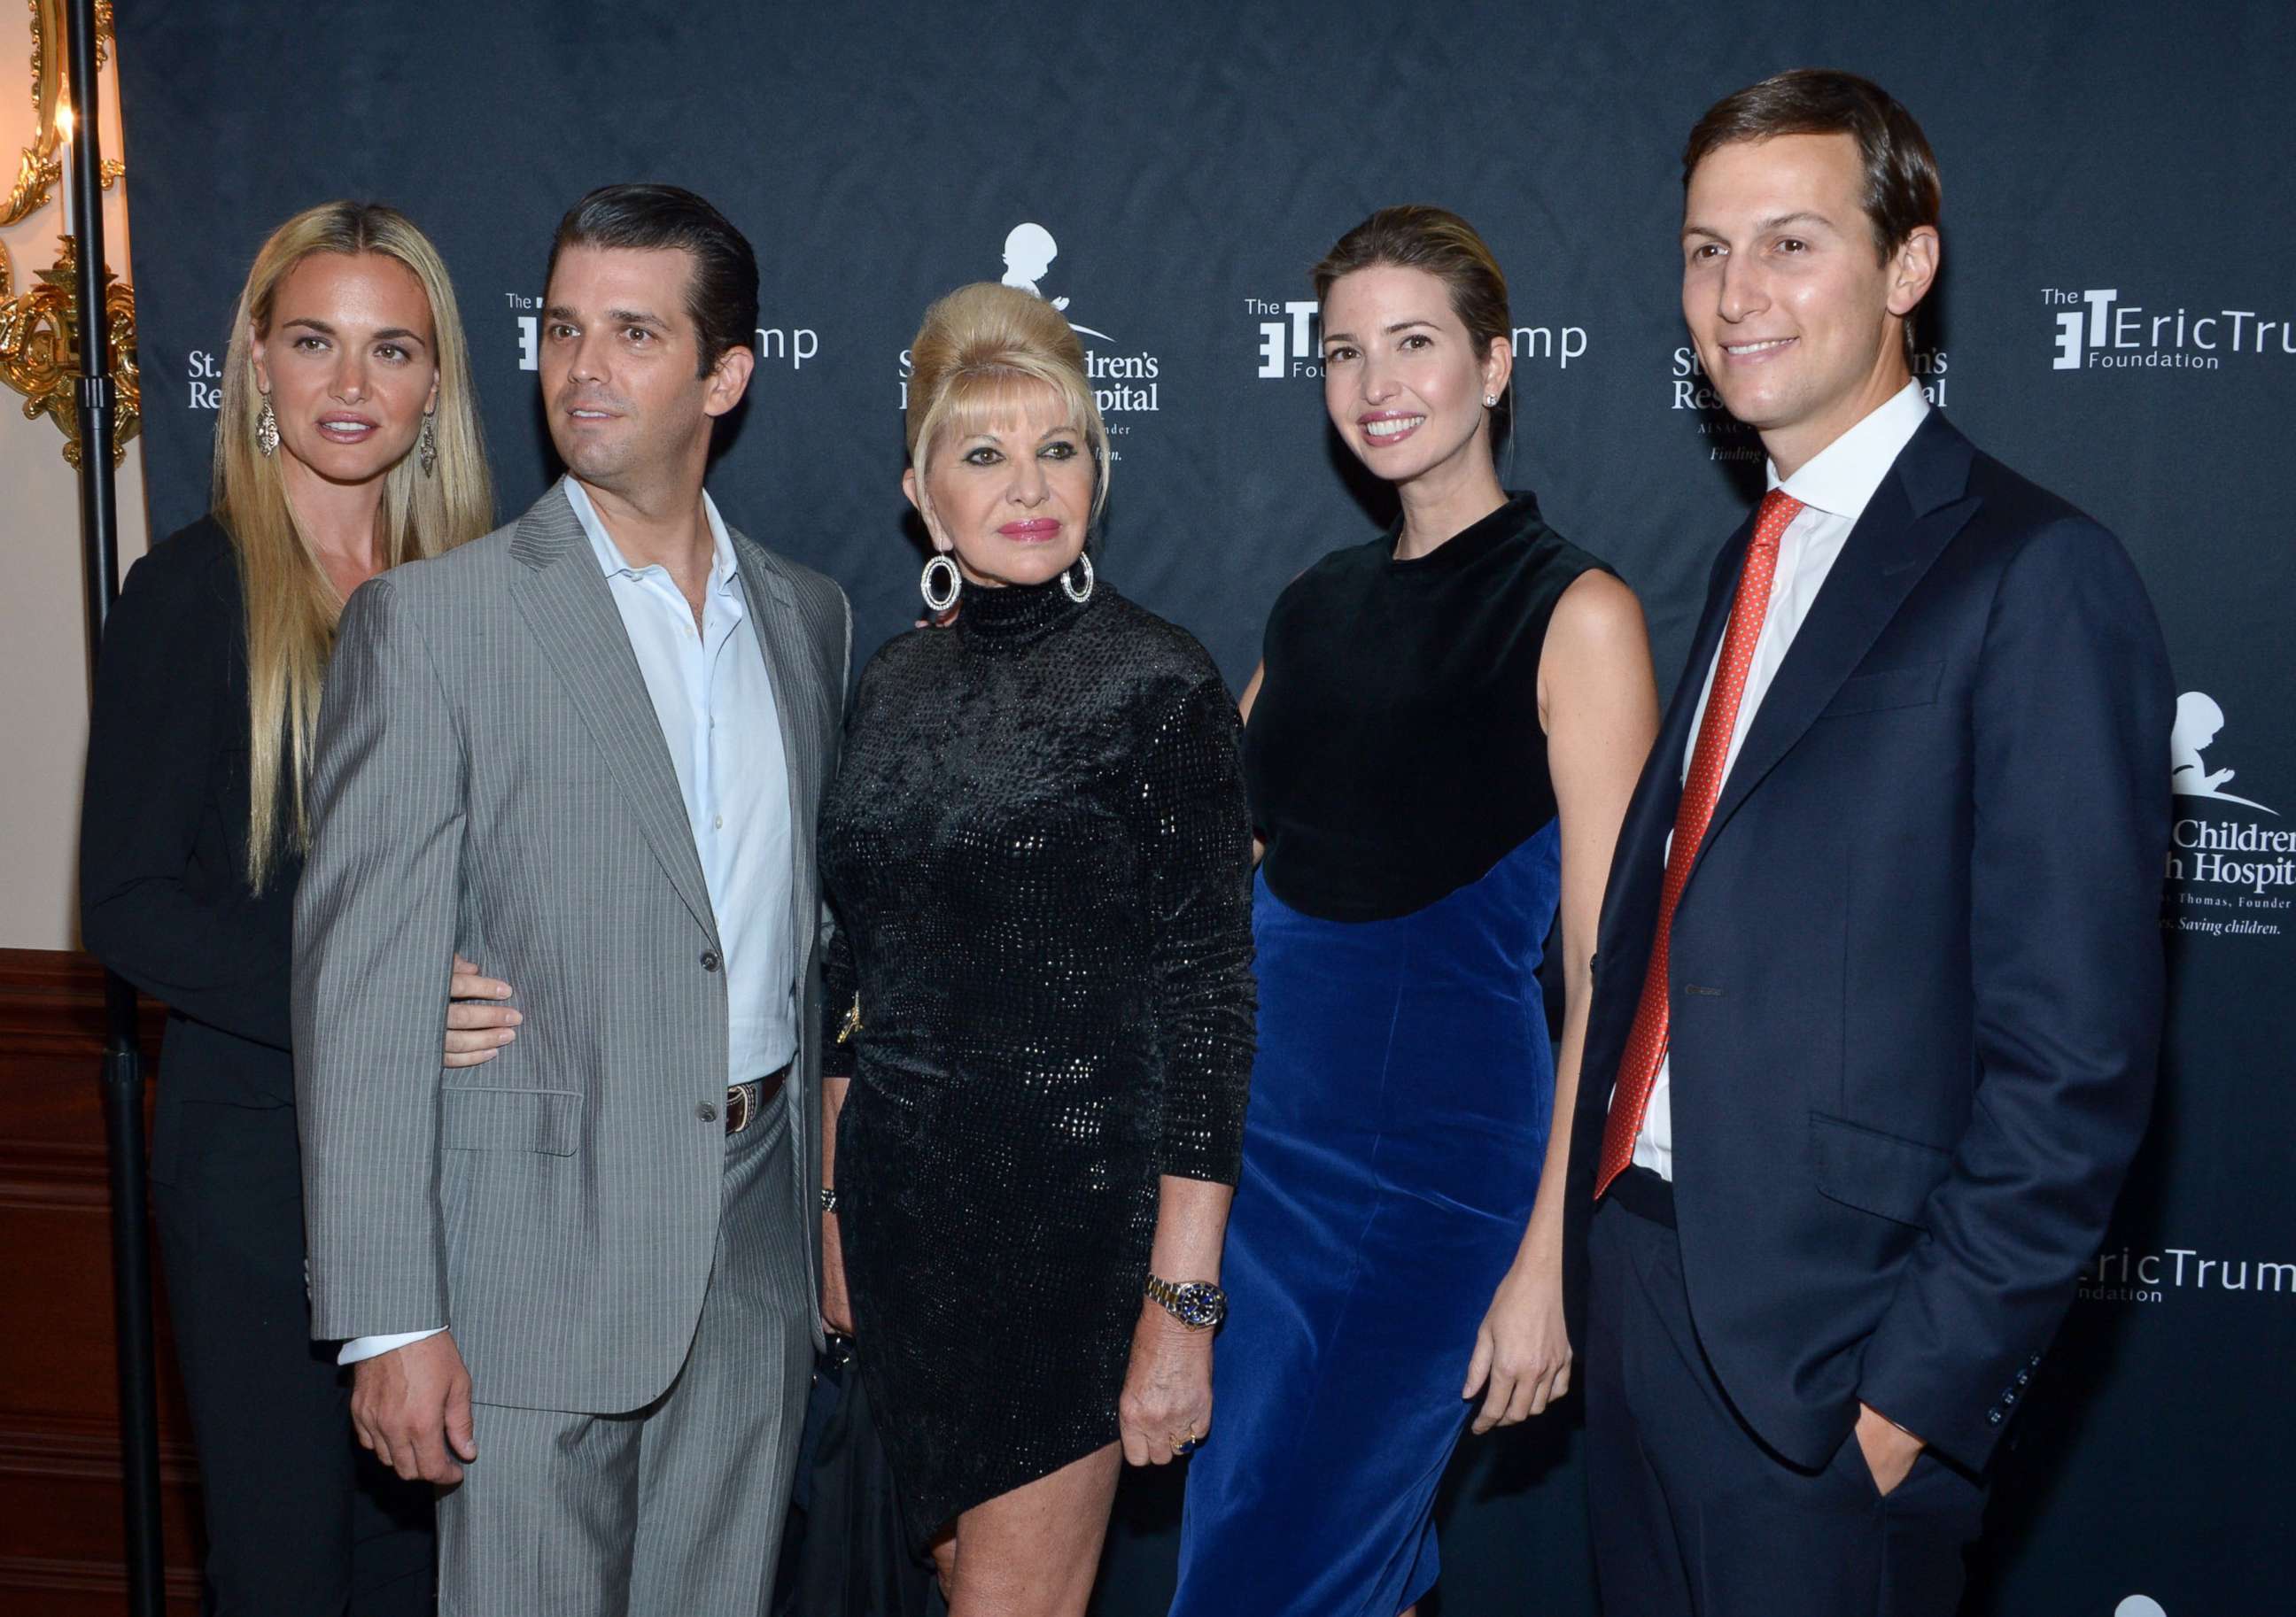 PHOTO: Donald Trump Jr., Ivana Trump, Ivanka Trump and Jared Kushner attend the 9th Annual Eric Trump Foundation Golf Invitational Auction & Dinner at Trump National Golf Club Westchester, in Briarcliff Manor, N.Y., Sept. 21, 2015